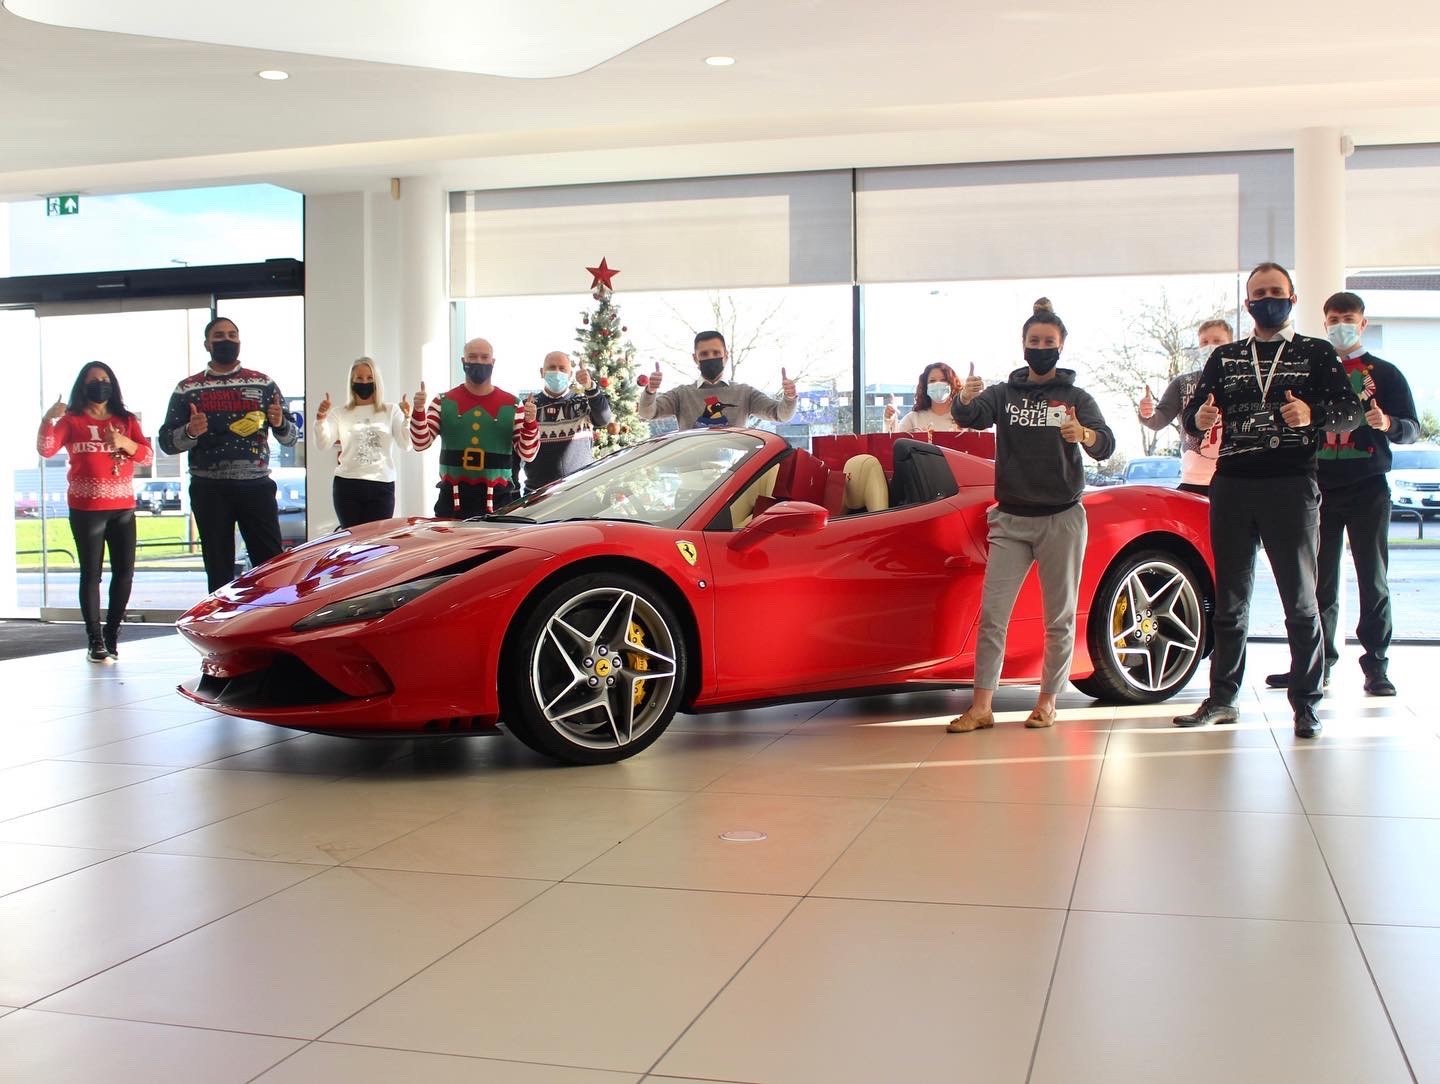 Ferrari dealers across the UK deliver toys to children’s charities, dc0a0d43 5b36 4e13 bc15 c65b6ae933ef%, daily-dad, news%